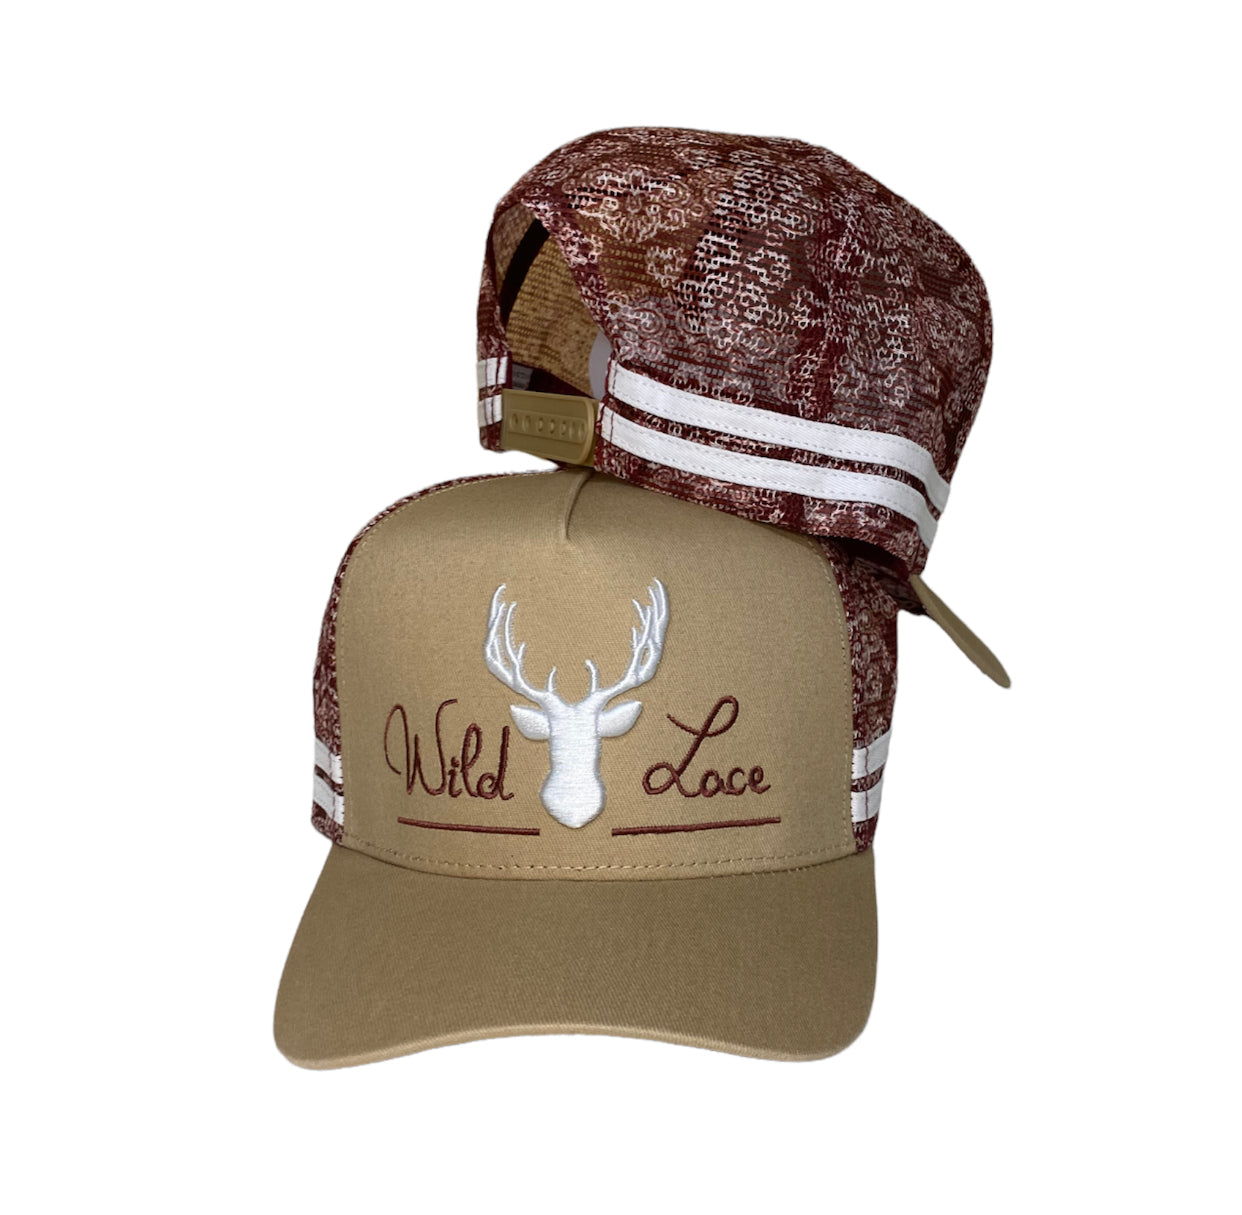 C383 - Wild Lace Mulberry Lace Country Trucker Cap